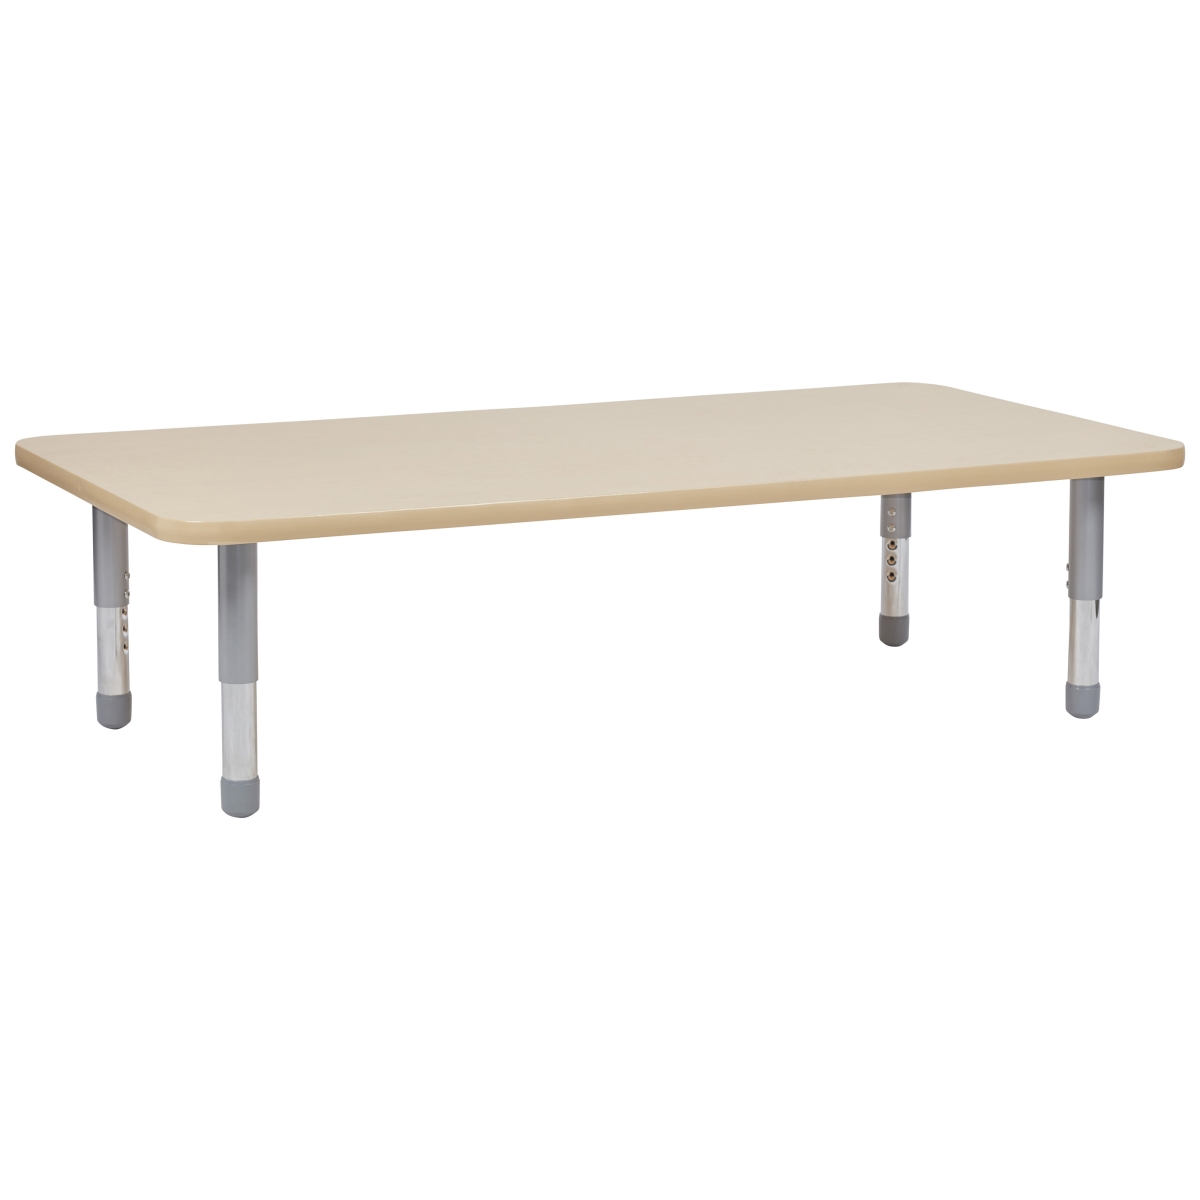 10098-mpmp 30 X 60 In. Rectangle T-mold Adjustable Activity Table With Floor Leg - Maple